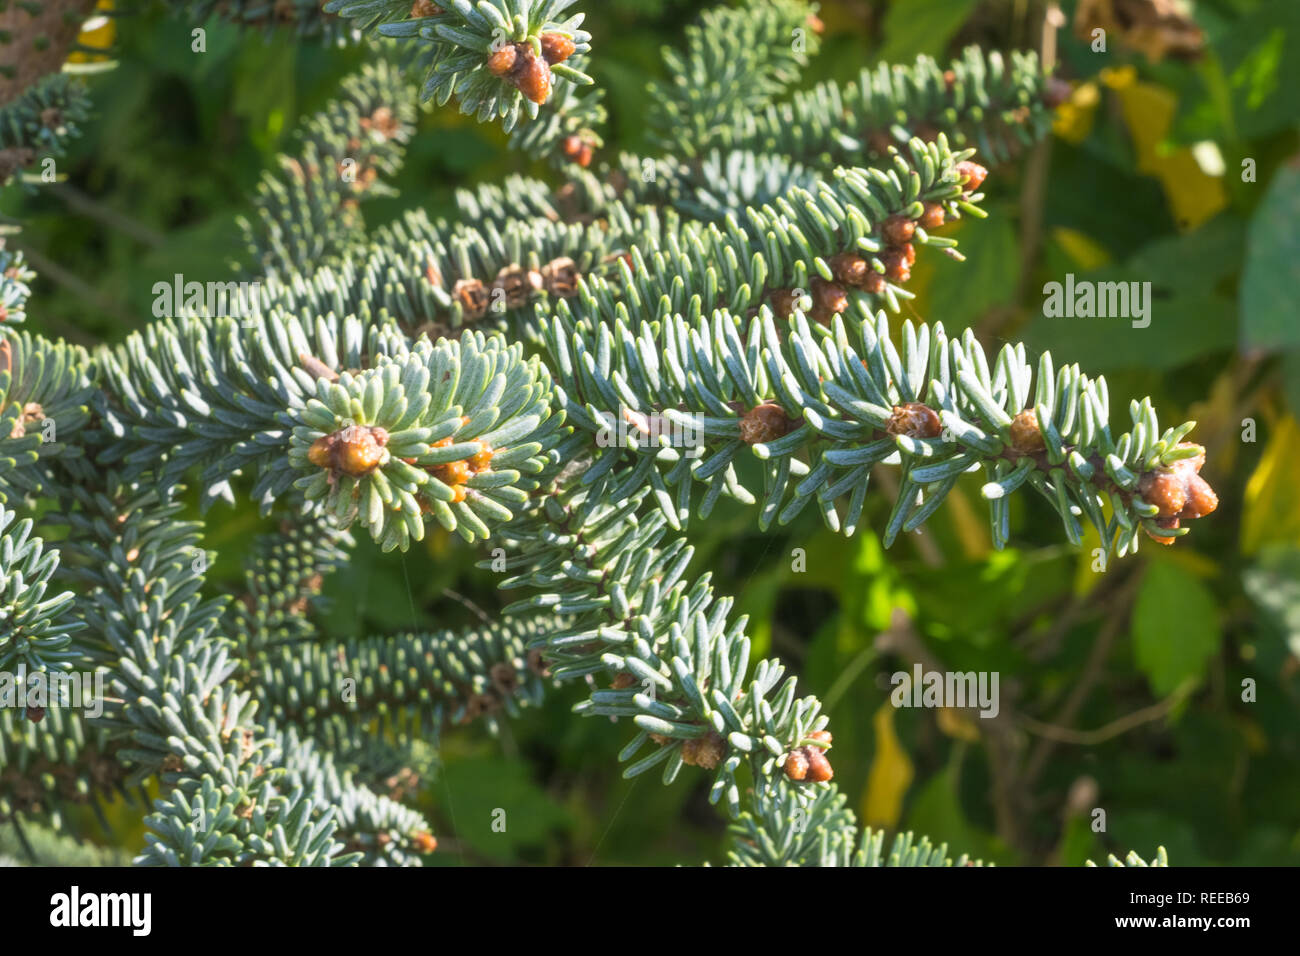 Spanish fir Abies pinsapo needles and branches. Abies pinsapo Spanish fir is a species of fir native to southern Spain and northern Morocco. Stock Photo